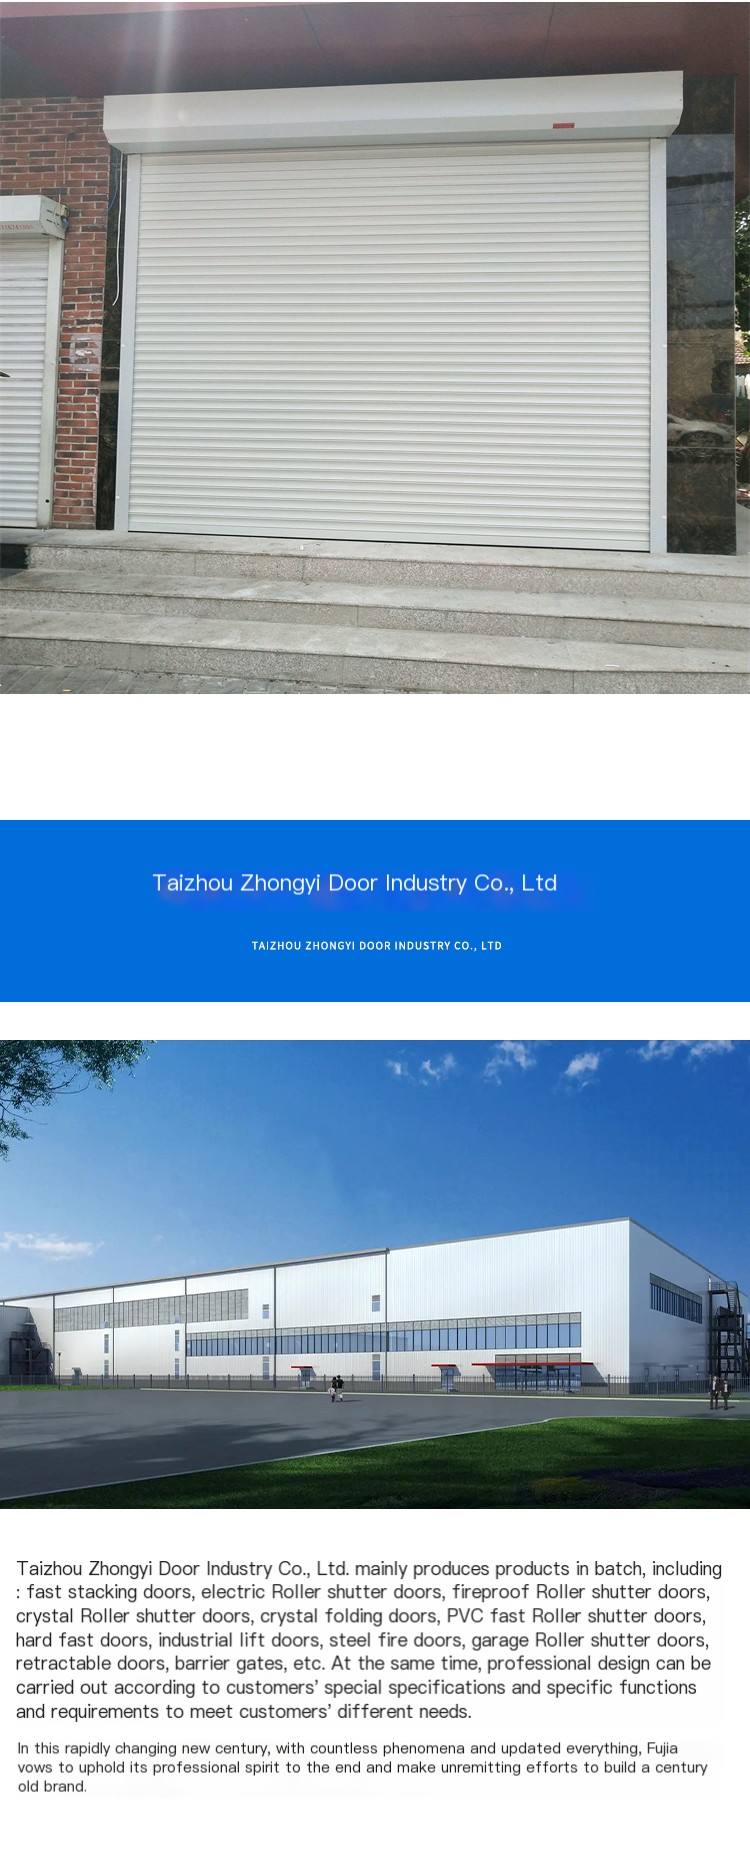 The aluminum alloy roller gate of Zhongyi warehouse runs smoothly and is customized and easy to clean according to needs